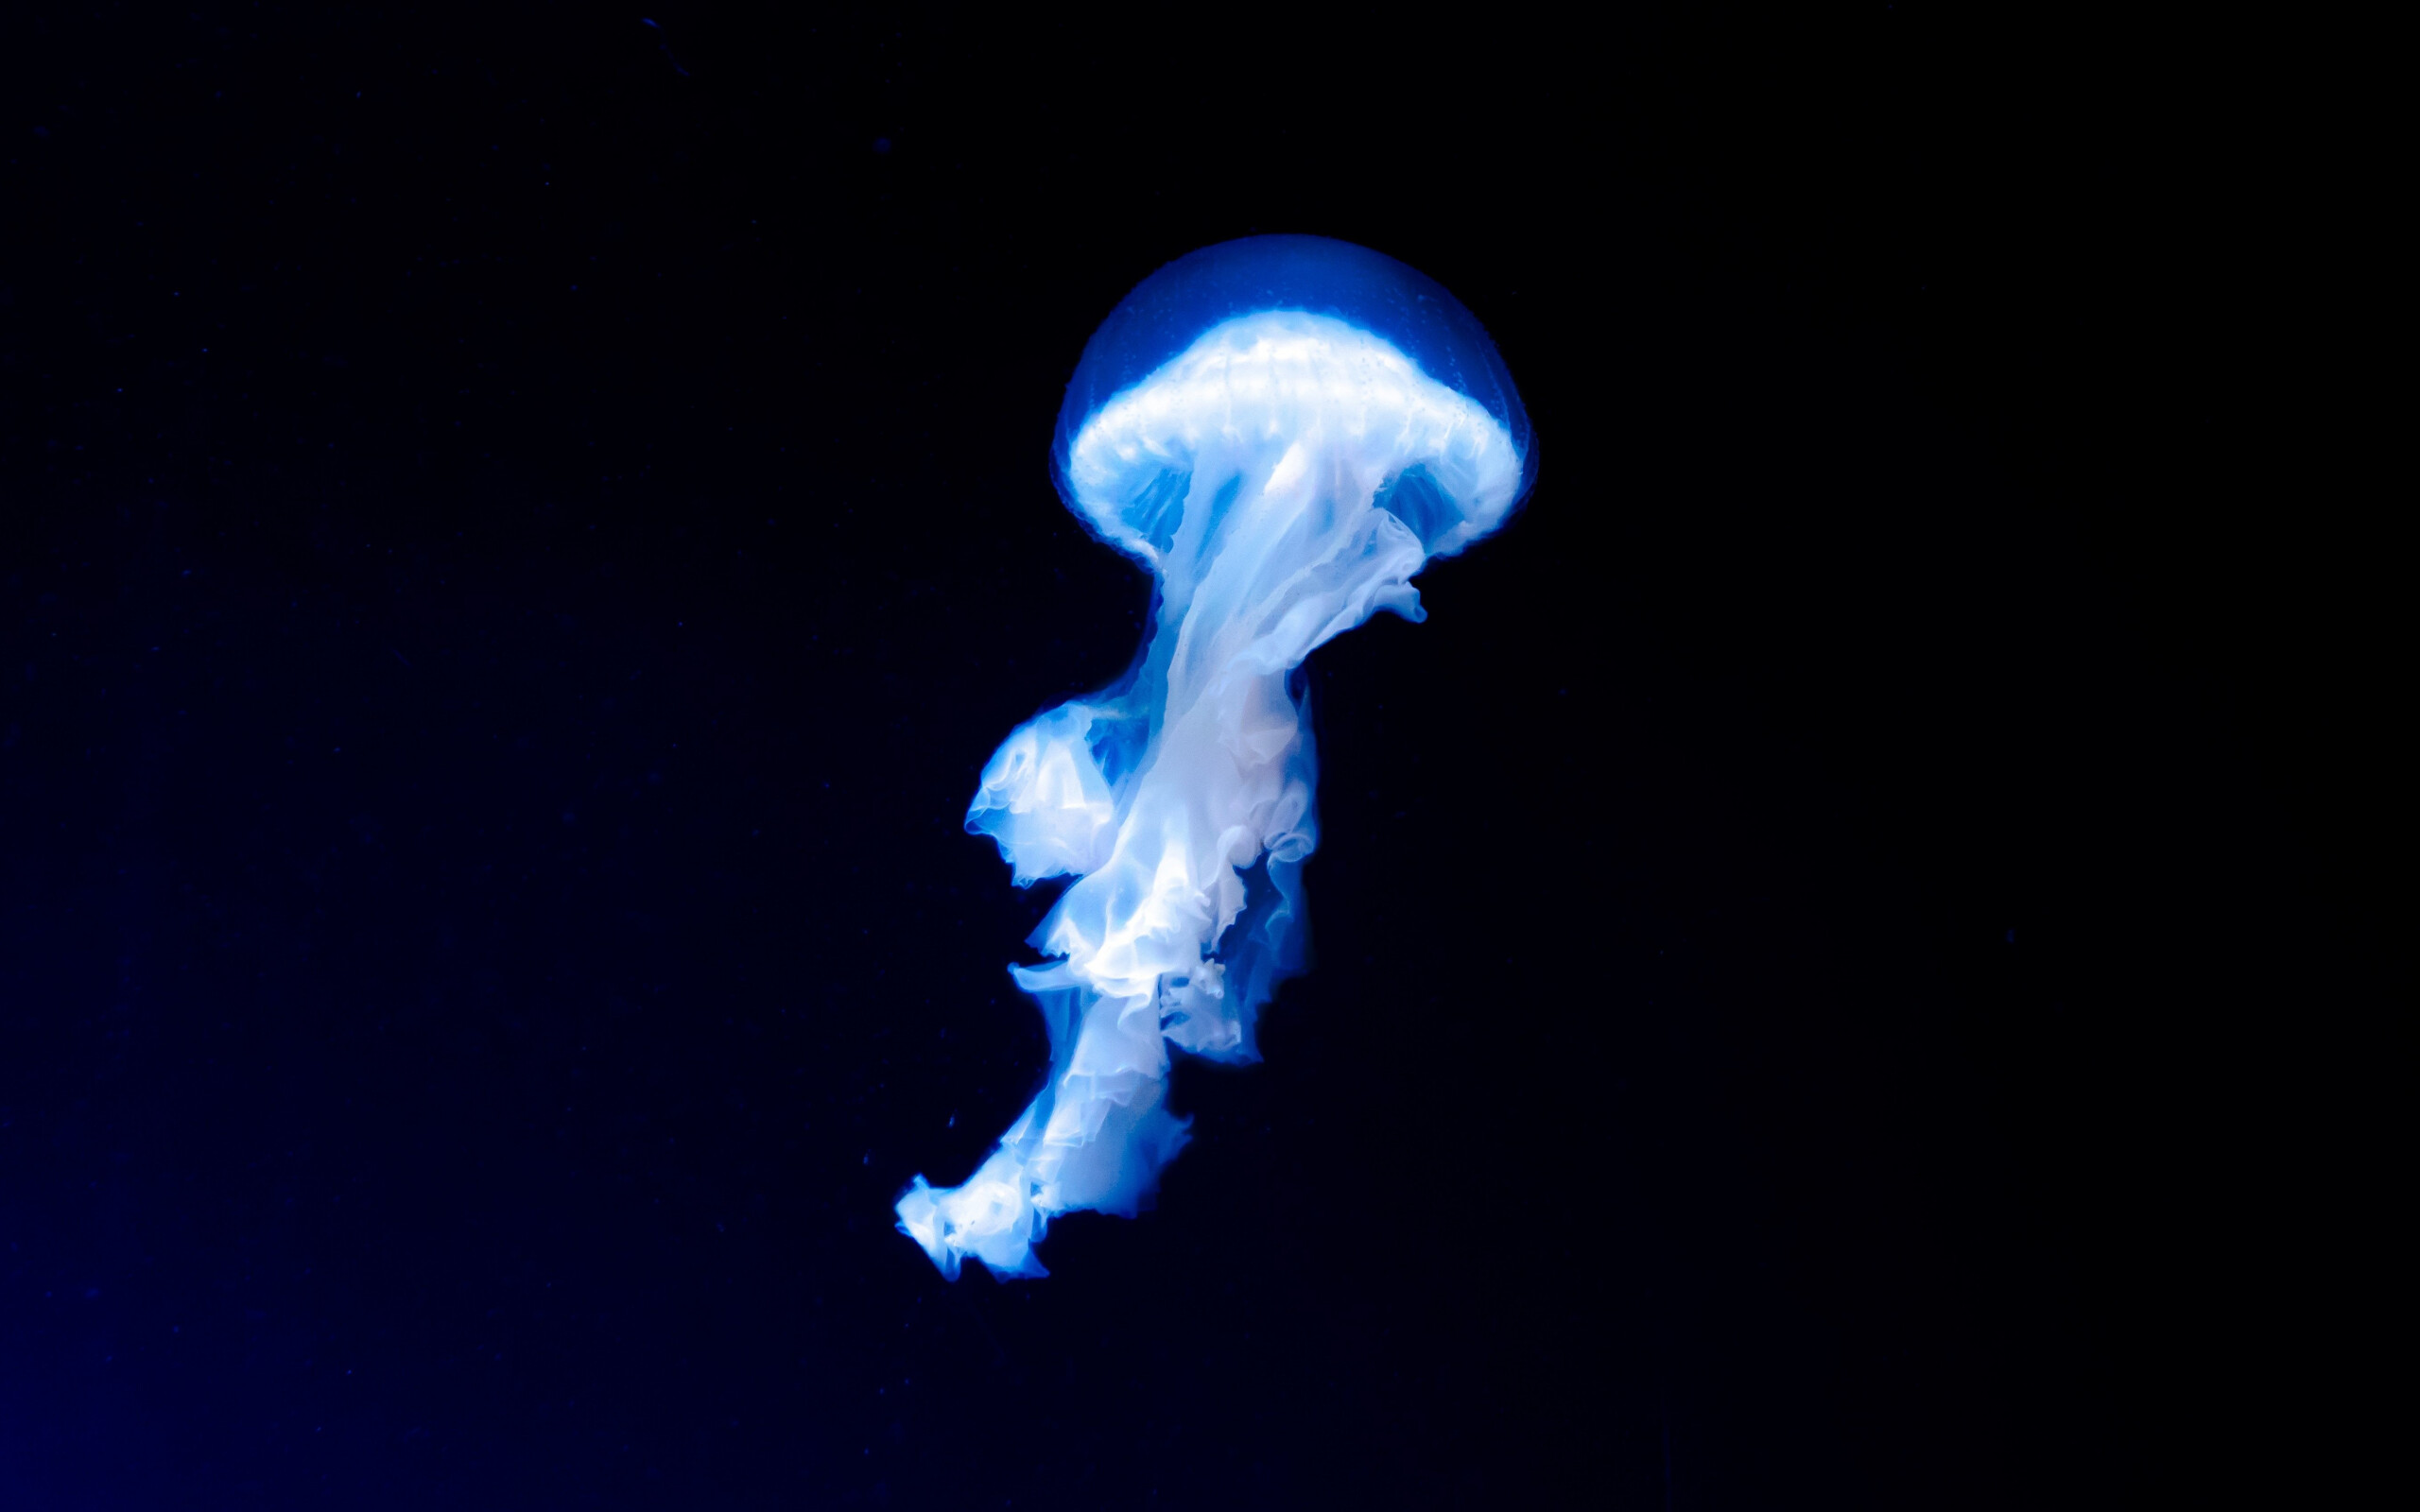 Glowing Jellyfish: Invertebrates that use a form of jet propulsion to move through the water, Aquatic life. 2560x1600 HD Wallpaper.